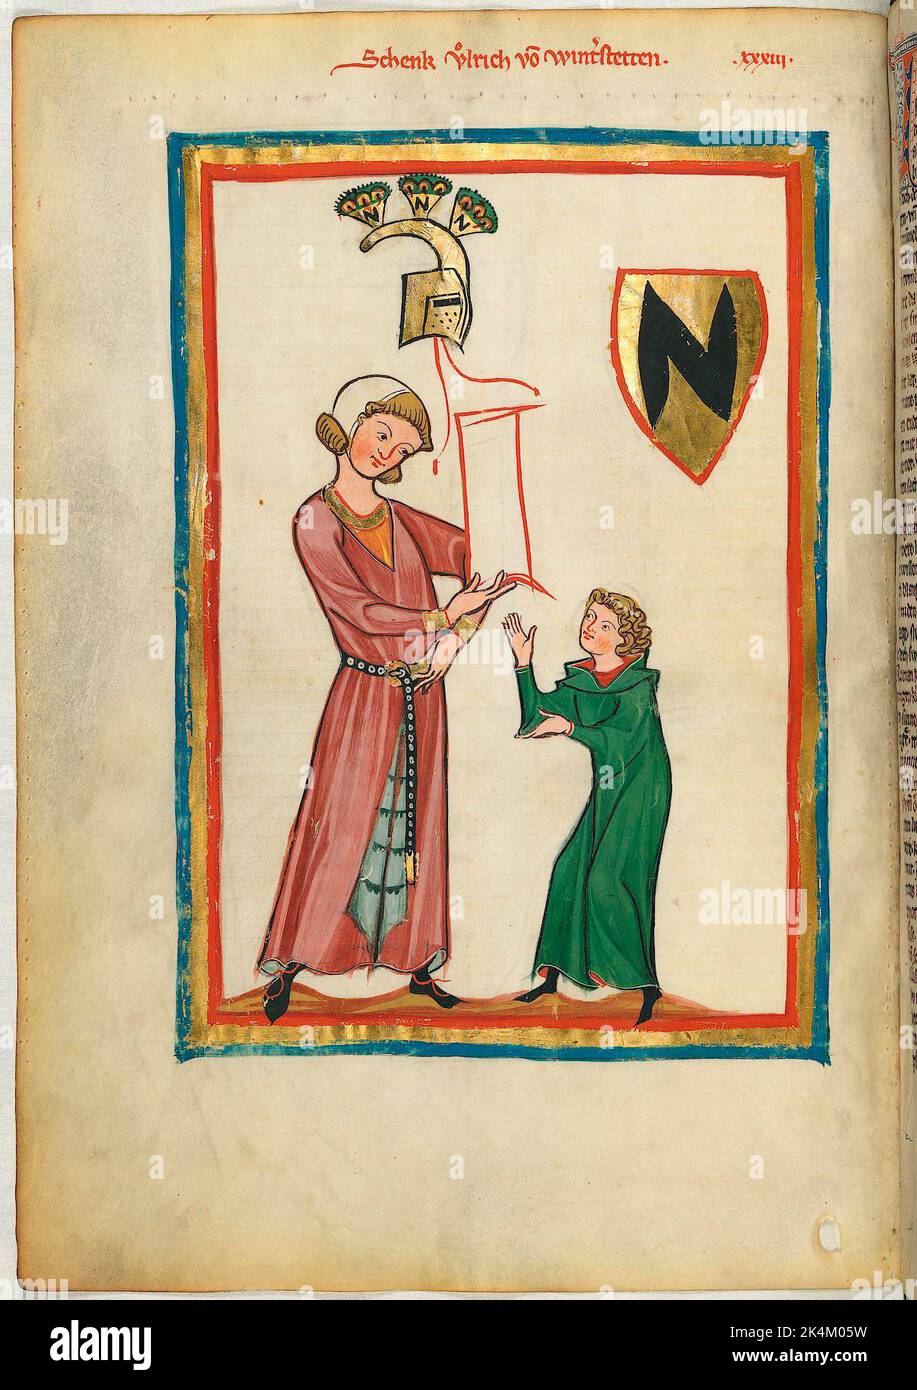 The 'Codex Manesse', also known as the 'Great Heidelberg Book of Songs' (Cod. Pal. germ. 848), was created between around 1300 and around 1340 in Zurich and is the most comprehensive collection of ballads and epigrammatic poetry in Middle High German language.  It consists of 426 parchments leaves, each 35,5 x 25 cm, double-sided, pagination added in a later scribe's hand. In addition the codex includes 140 blank pages and numerous pages partially blank. Great Heidelberg Book of Songs. Grosse Heidelberger Liederhandschrift. Codex Manesse. Illuminated manuscript, Medieval art.  Heidelberg, Univ Stock Photo